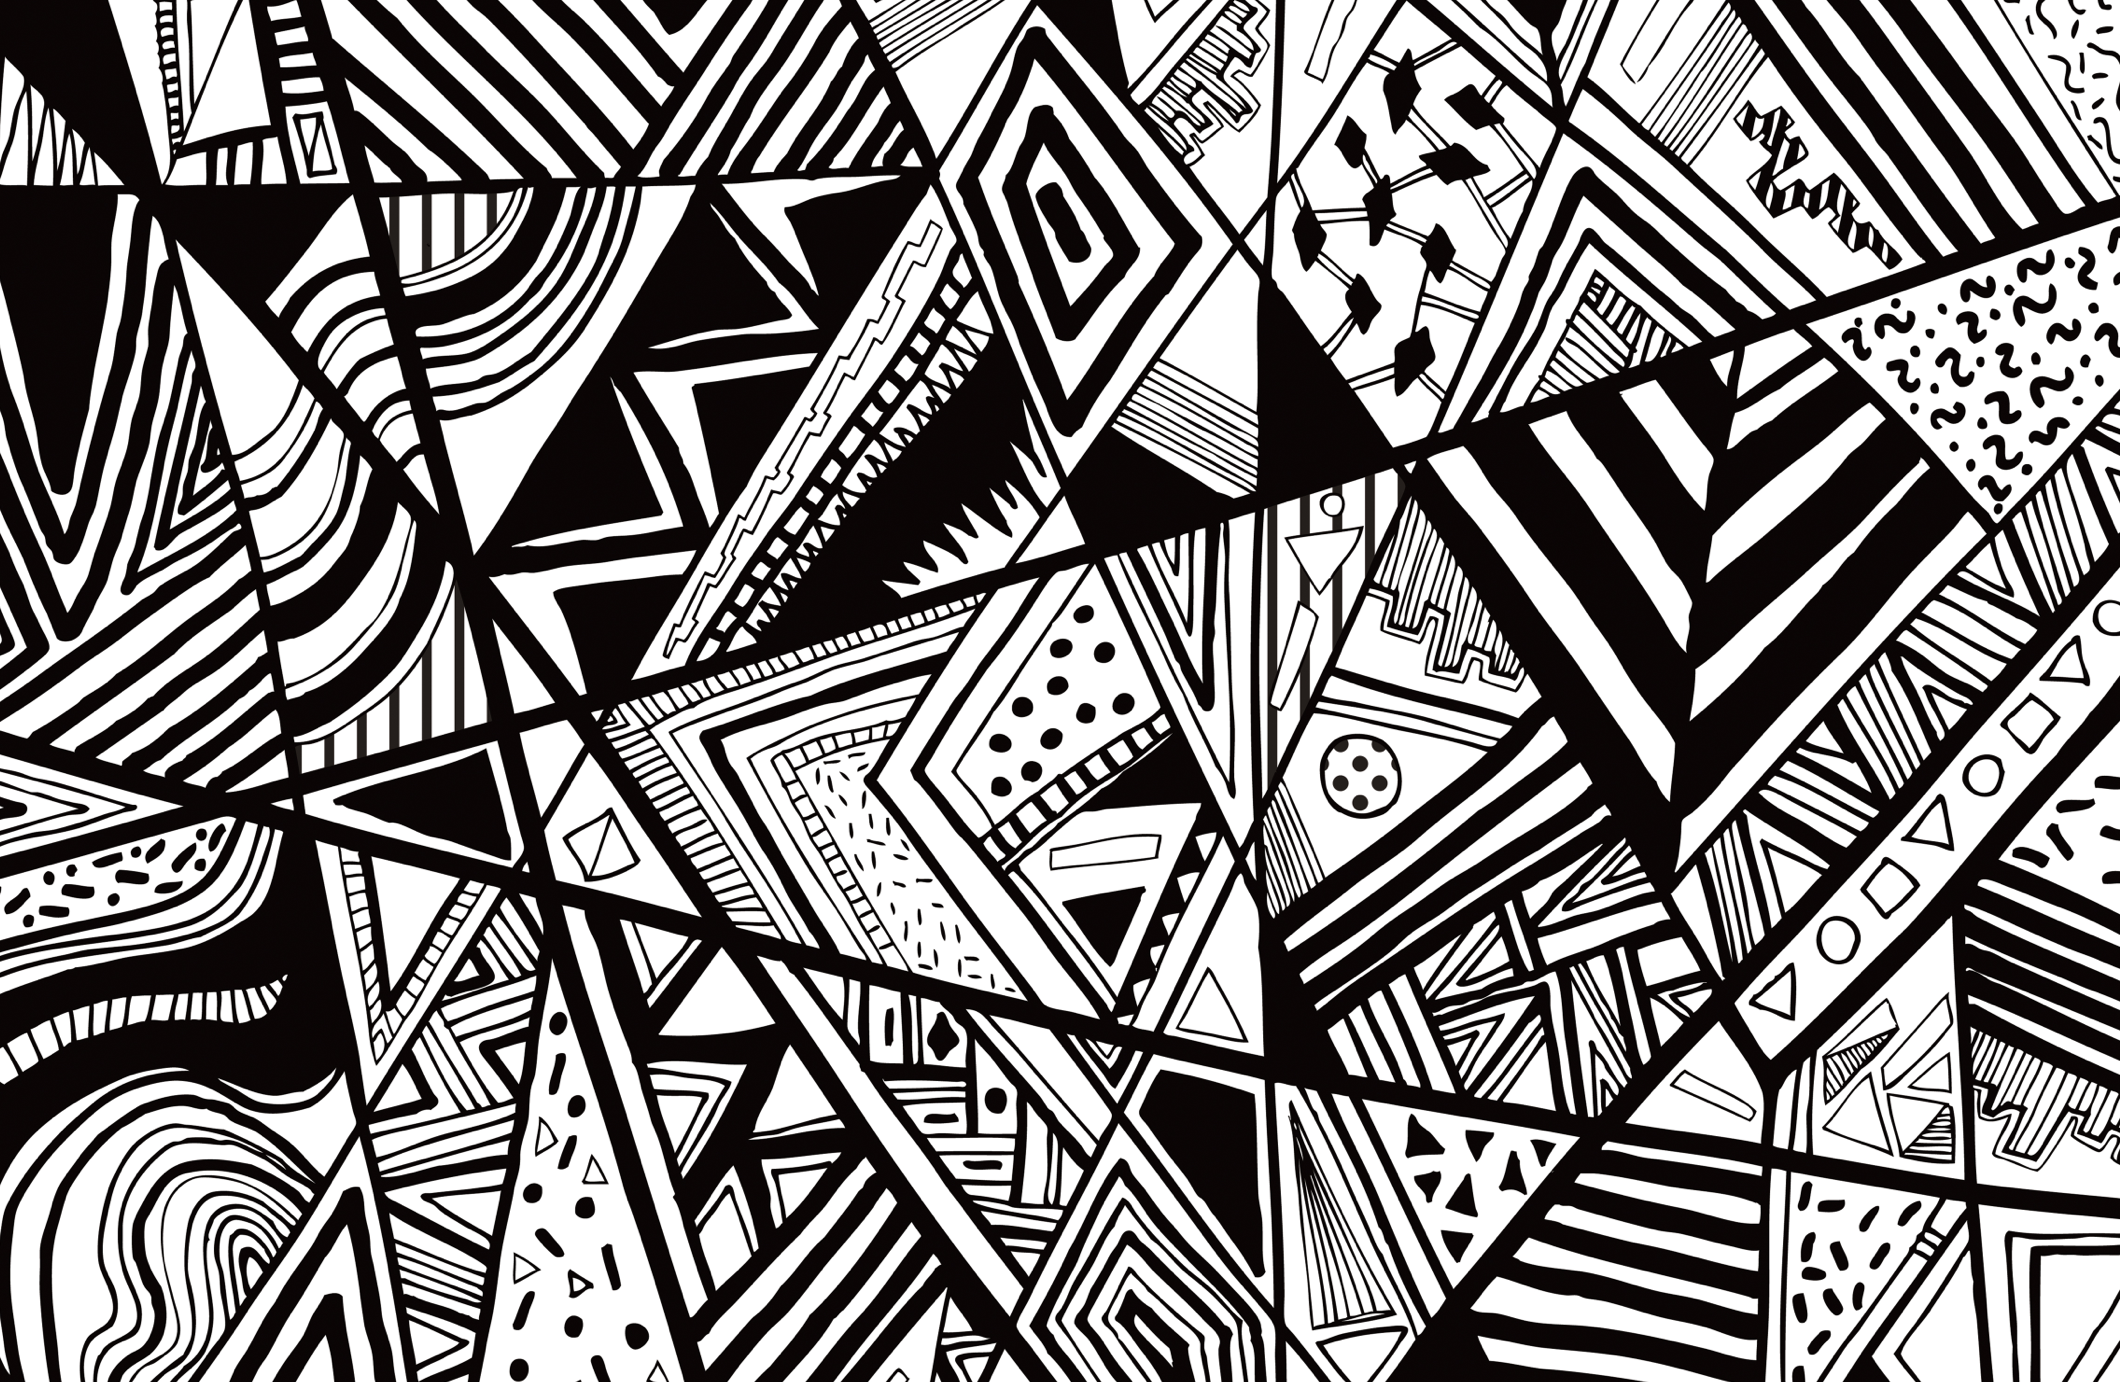 Pics Photos - Black And White Abstract Wallpaper 3686 Hd ...